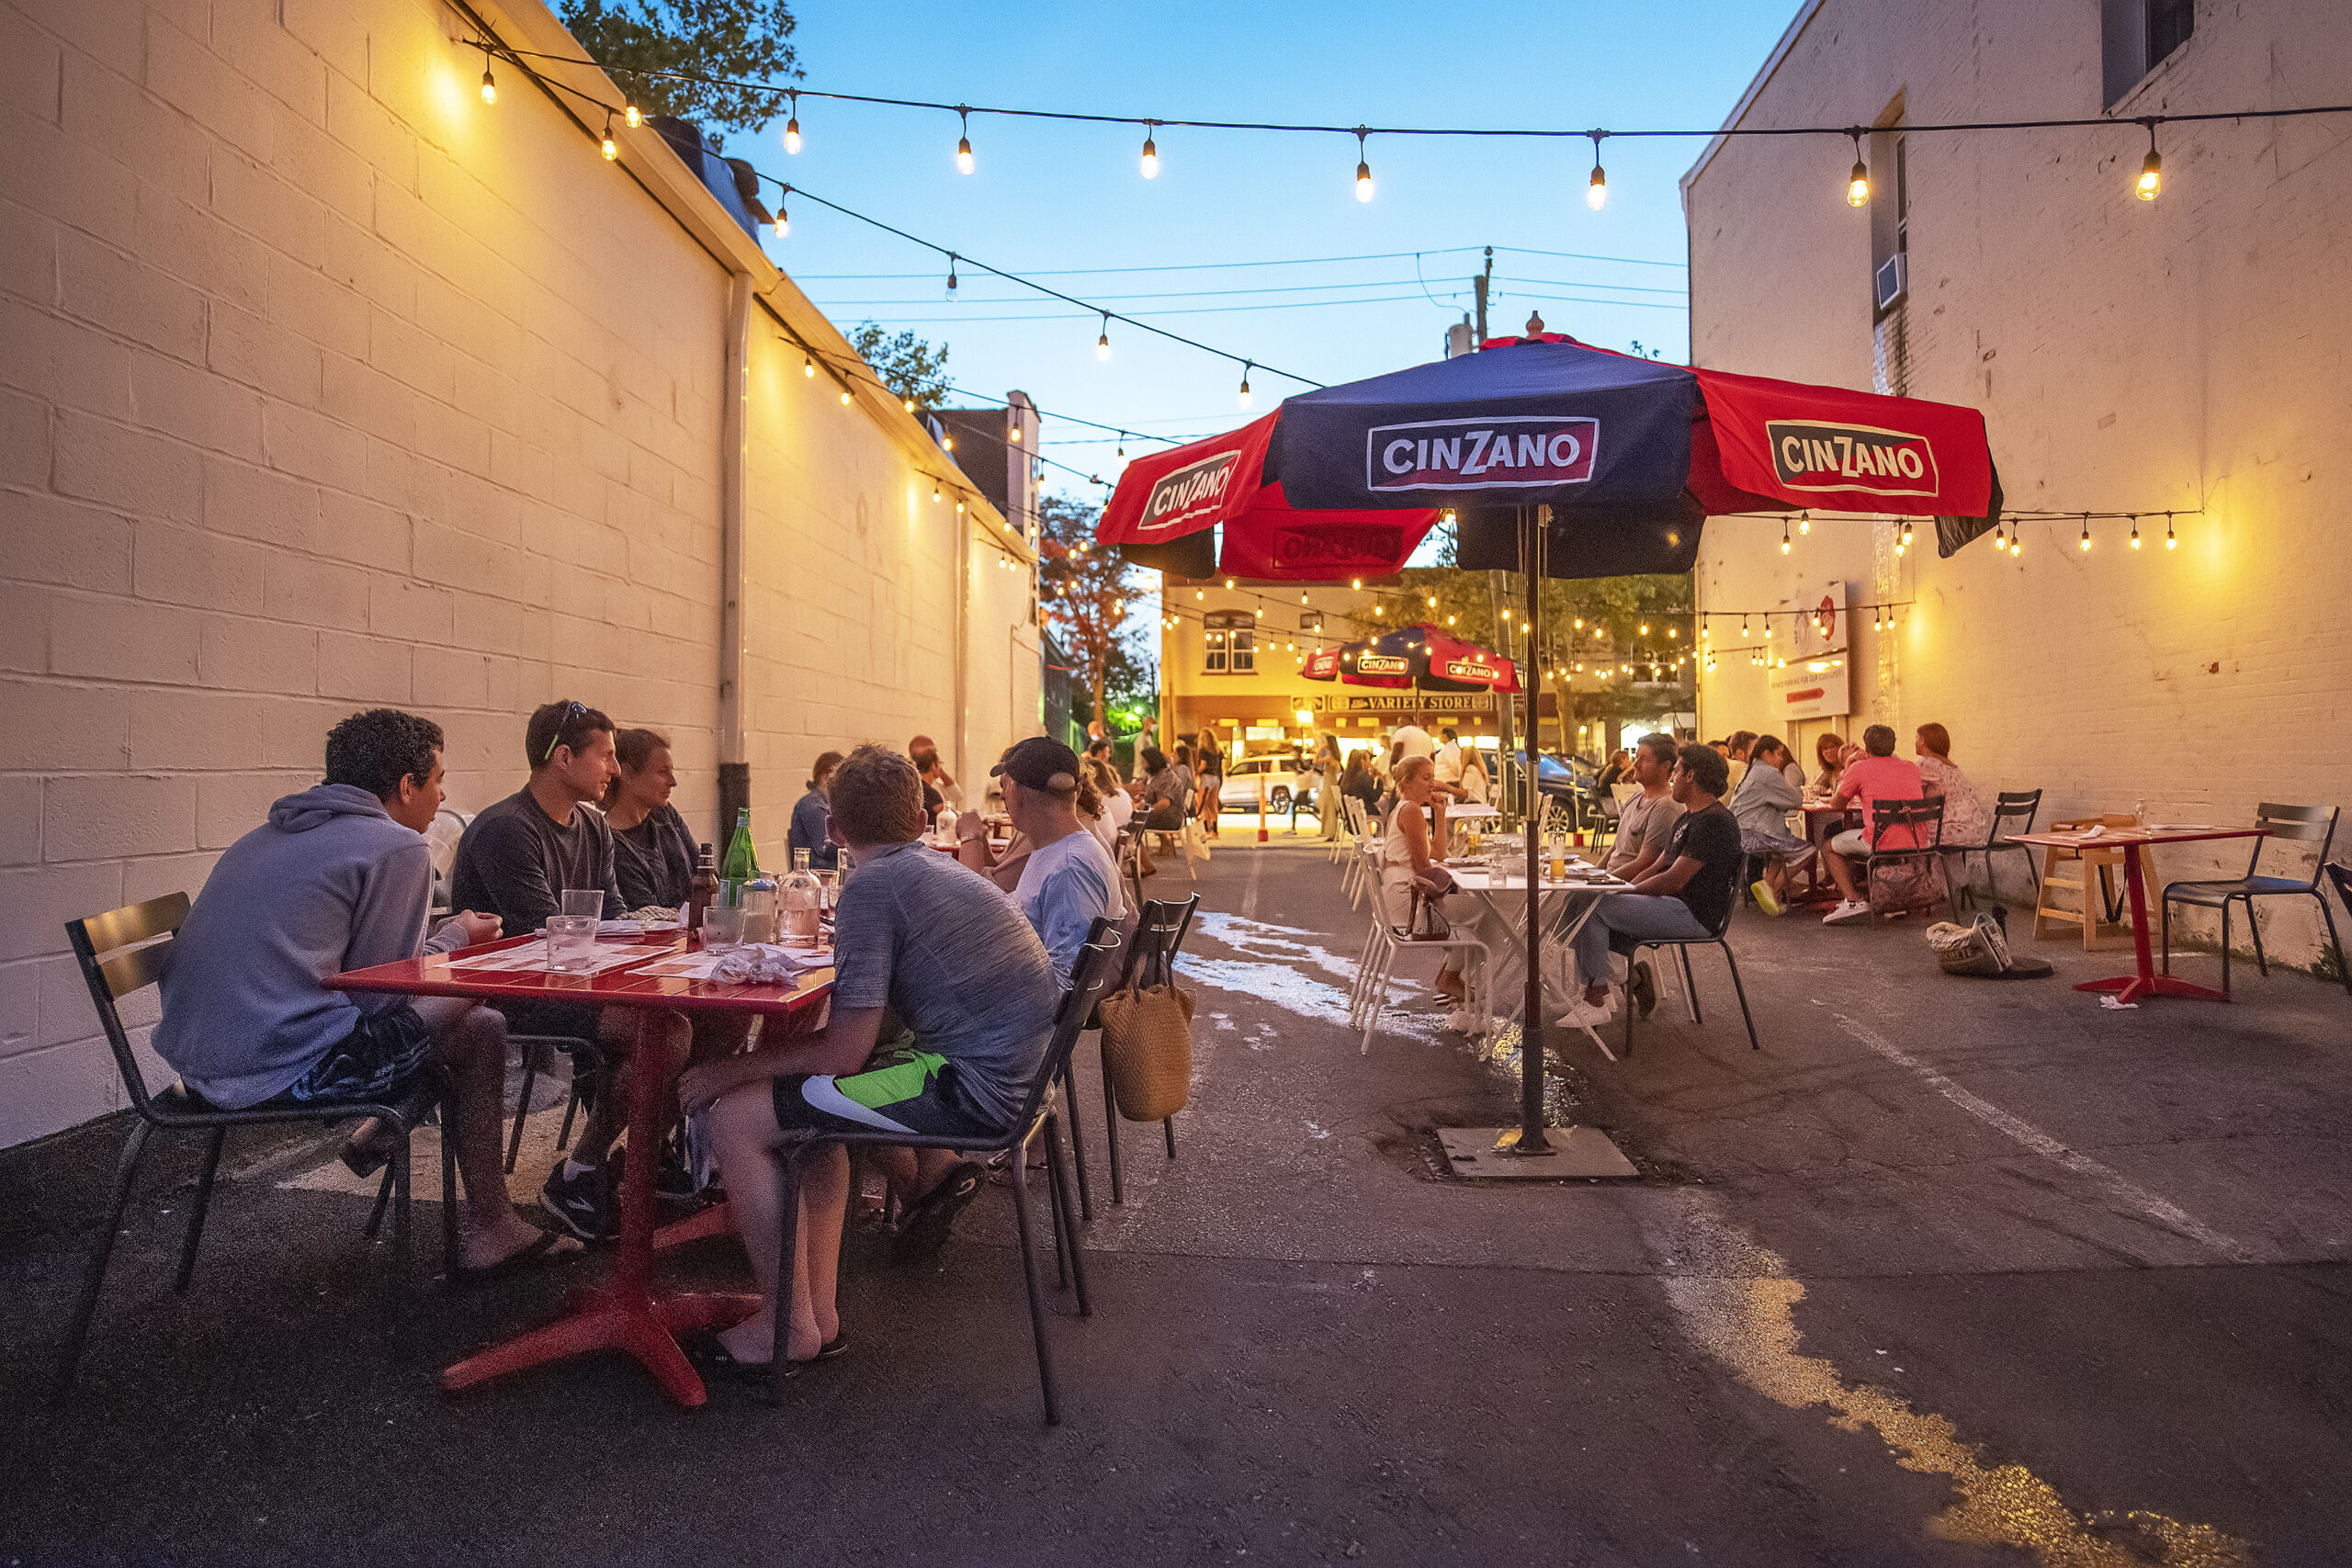 The outdoor dining space in the alley adjacent to Sag Pizza in Sag Harbor created in response to the COVID-19 pandemic, photographed on August 21, 2020.   MICHAEL HELLER